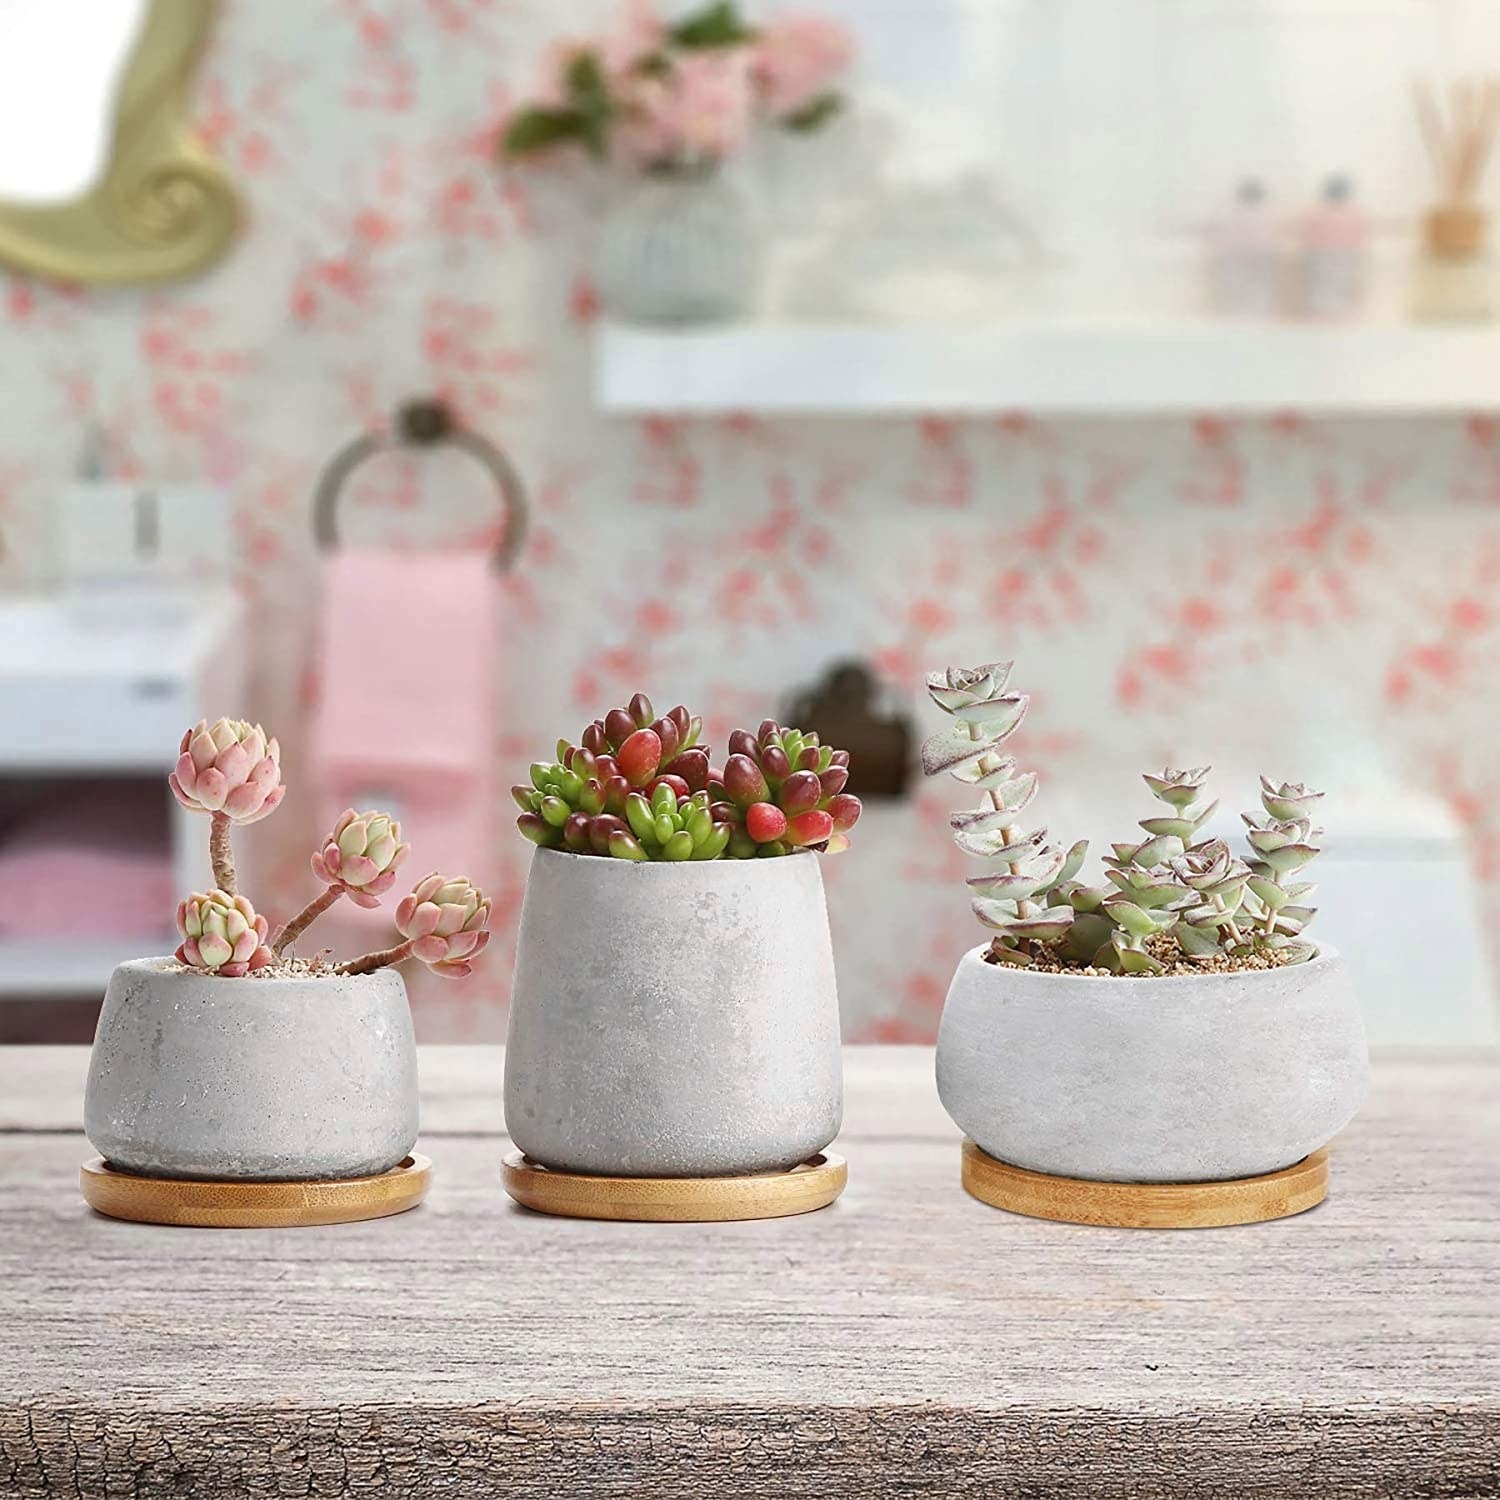 Three cement pots of various sizes sitting on bamboo coasters